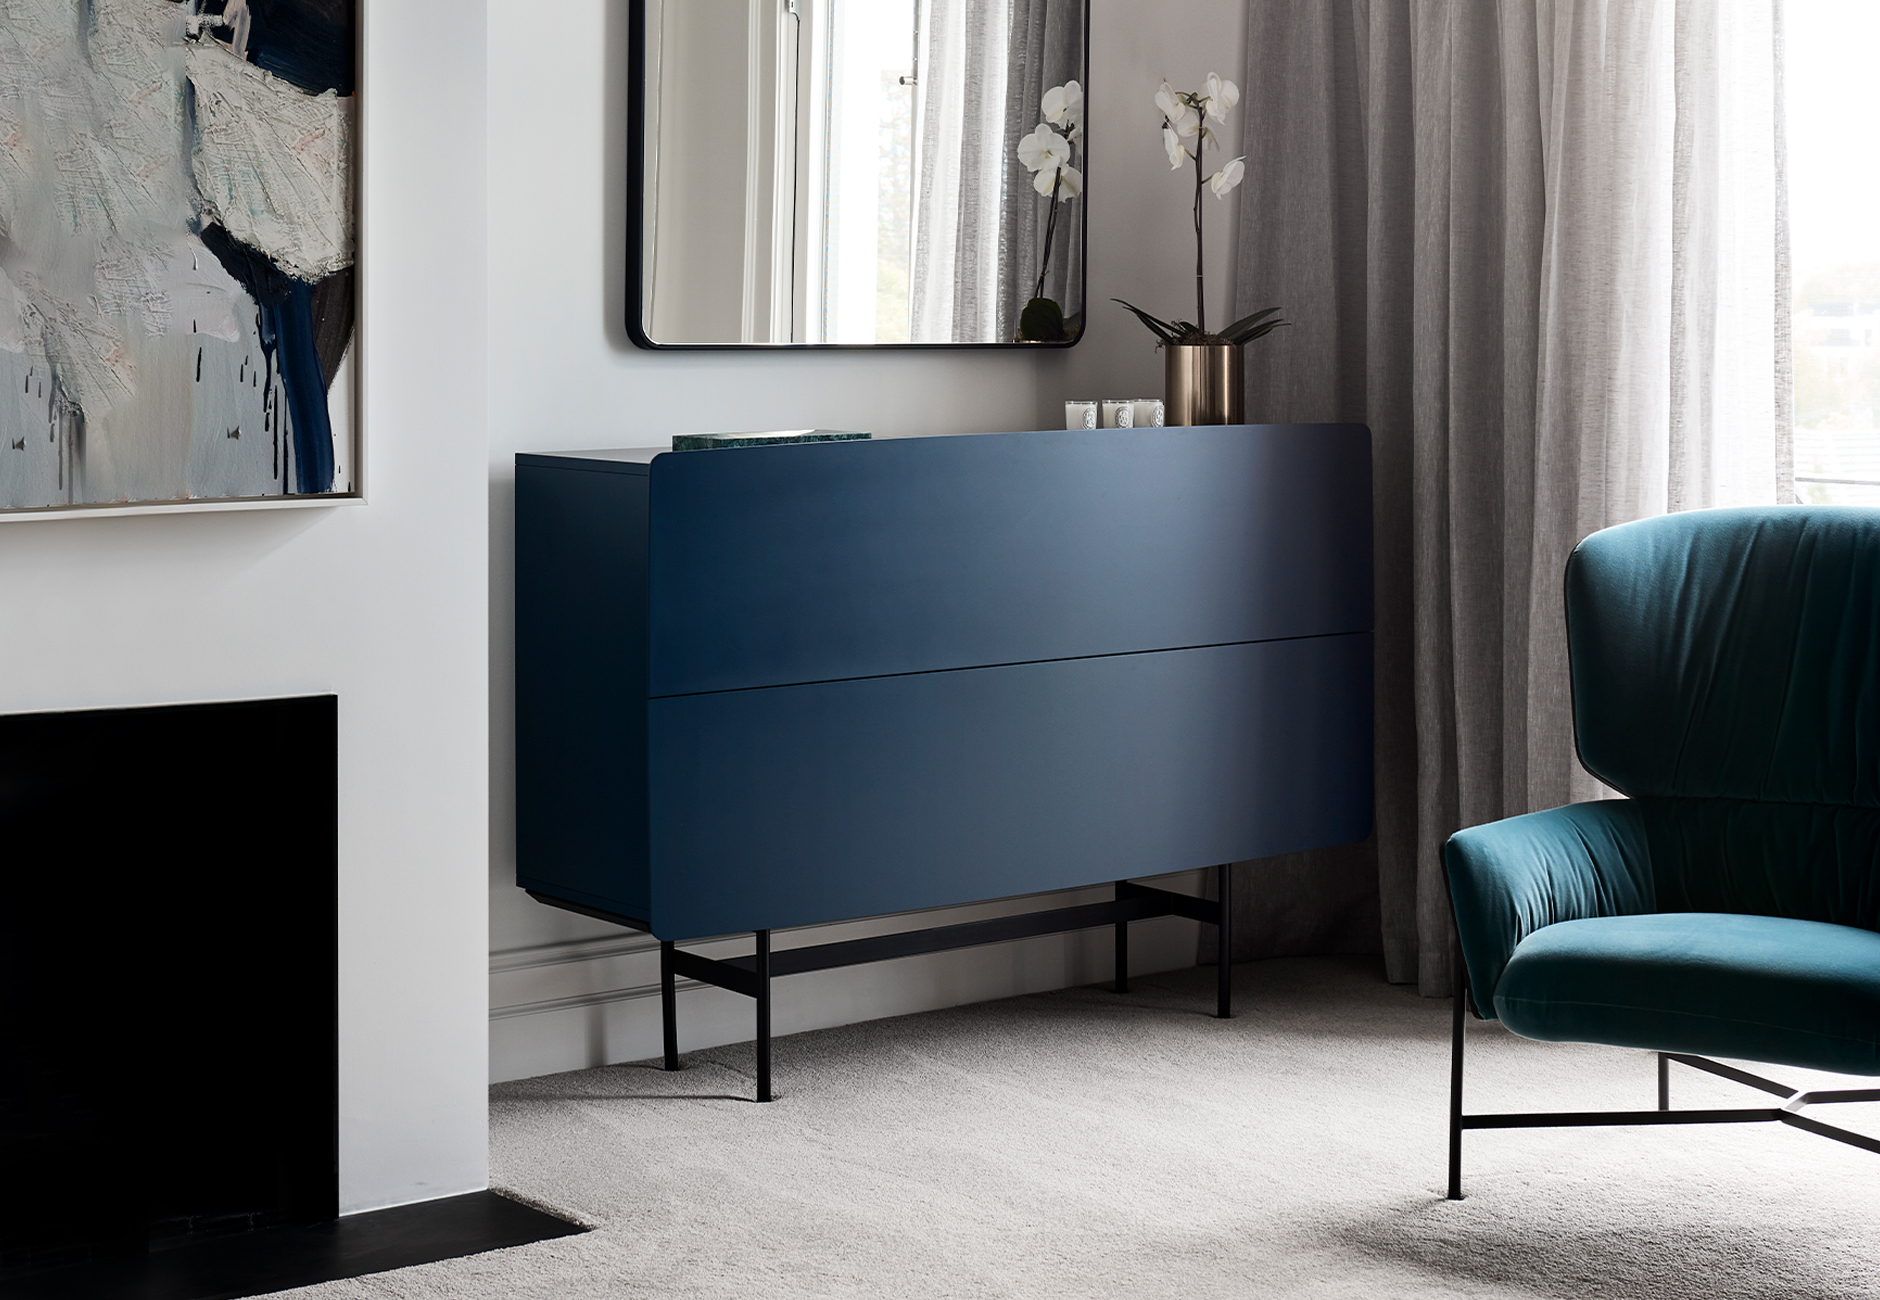 The living space features the Yee storage composition C and Caristo armchair by SP01 Design. Photo © Eve Watson.